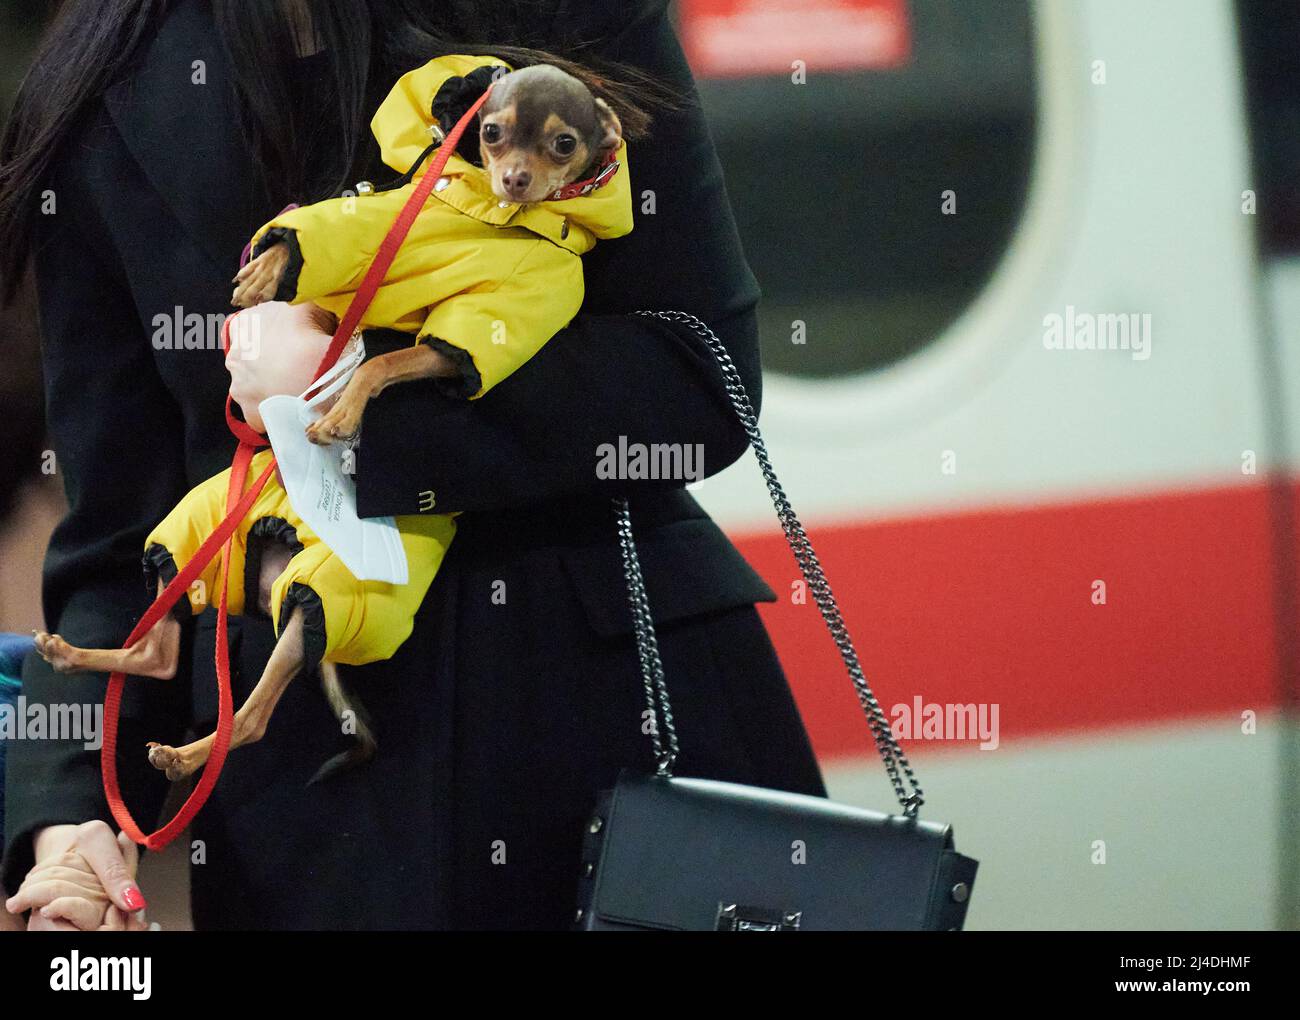 Berlin, Germany. 14th Apr, 2022. A woman has her dog in one hand and a child in the other as she makes her way up the escalator at the main train station. Shortly before the Easter holidays, many trains are fully booked. Credit: Annette Riedl/dpa/Alamy Live News Stock Photo